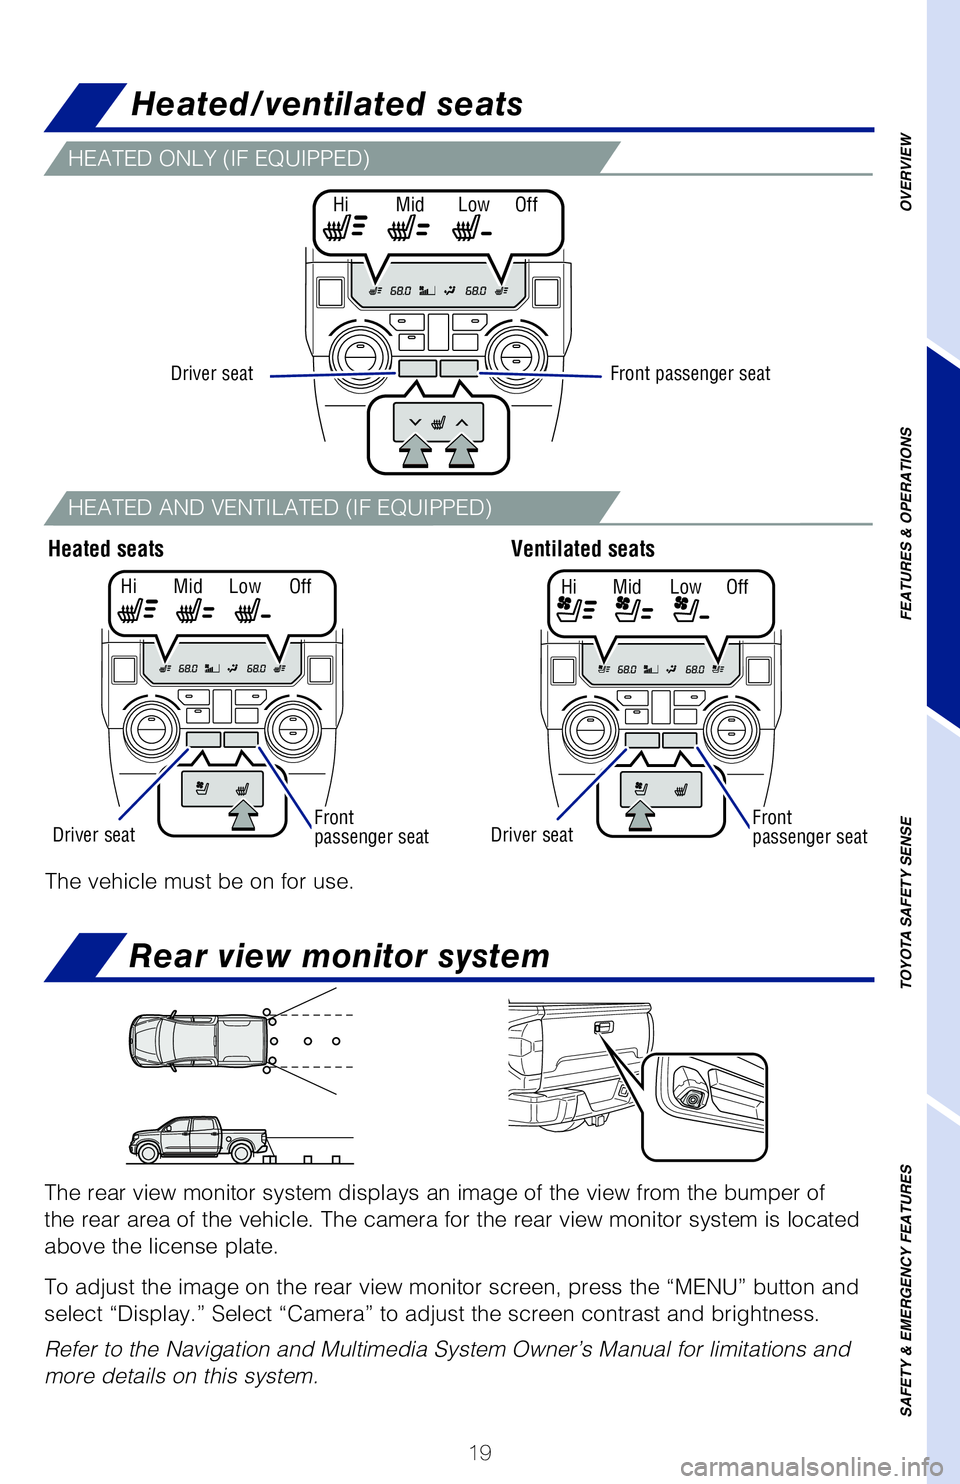 TOYOTA TUNDRA 2021  Owners Manual (in English) 19
Air conditioning/heating
HEATED ONLY (IF EQUIPPED)
HEATED AND VENTILATED (IF EQUIPPED)
The rear view monitor system displays an image of the view from the bump\
er of 
the rear area of the vehicle.